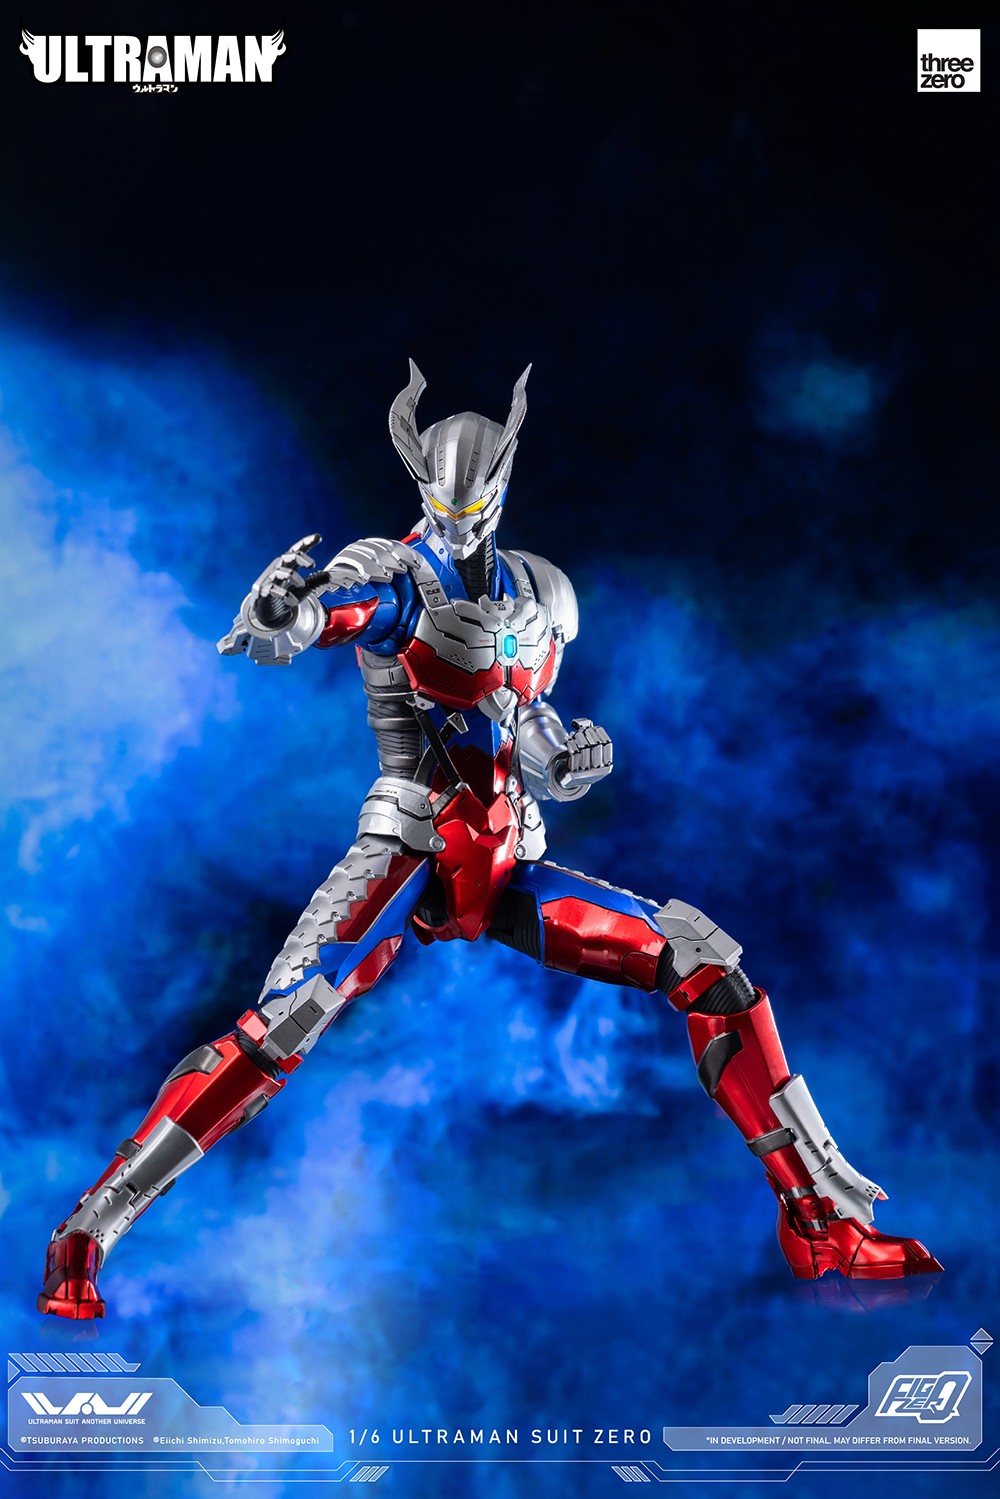 ULTRAMAN SUIT ANOTHER UNIVERSE』の可動フィギュア「フィグゼロ 1/6